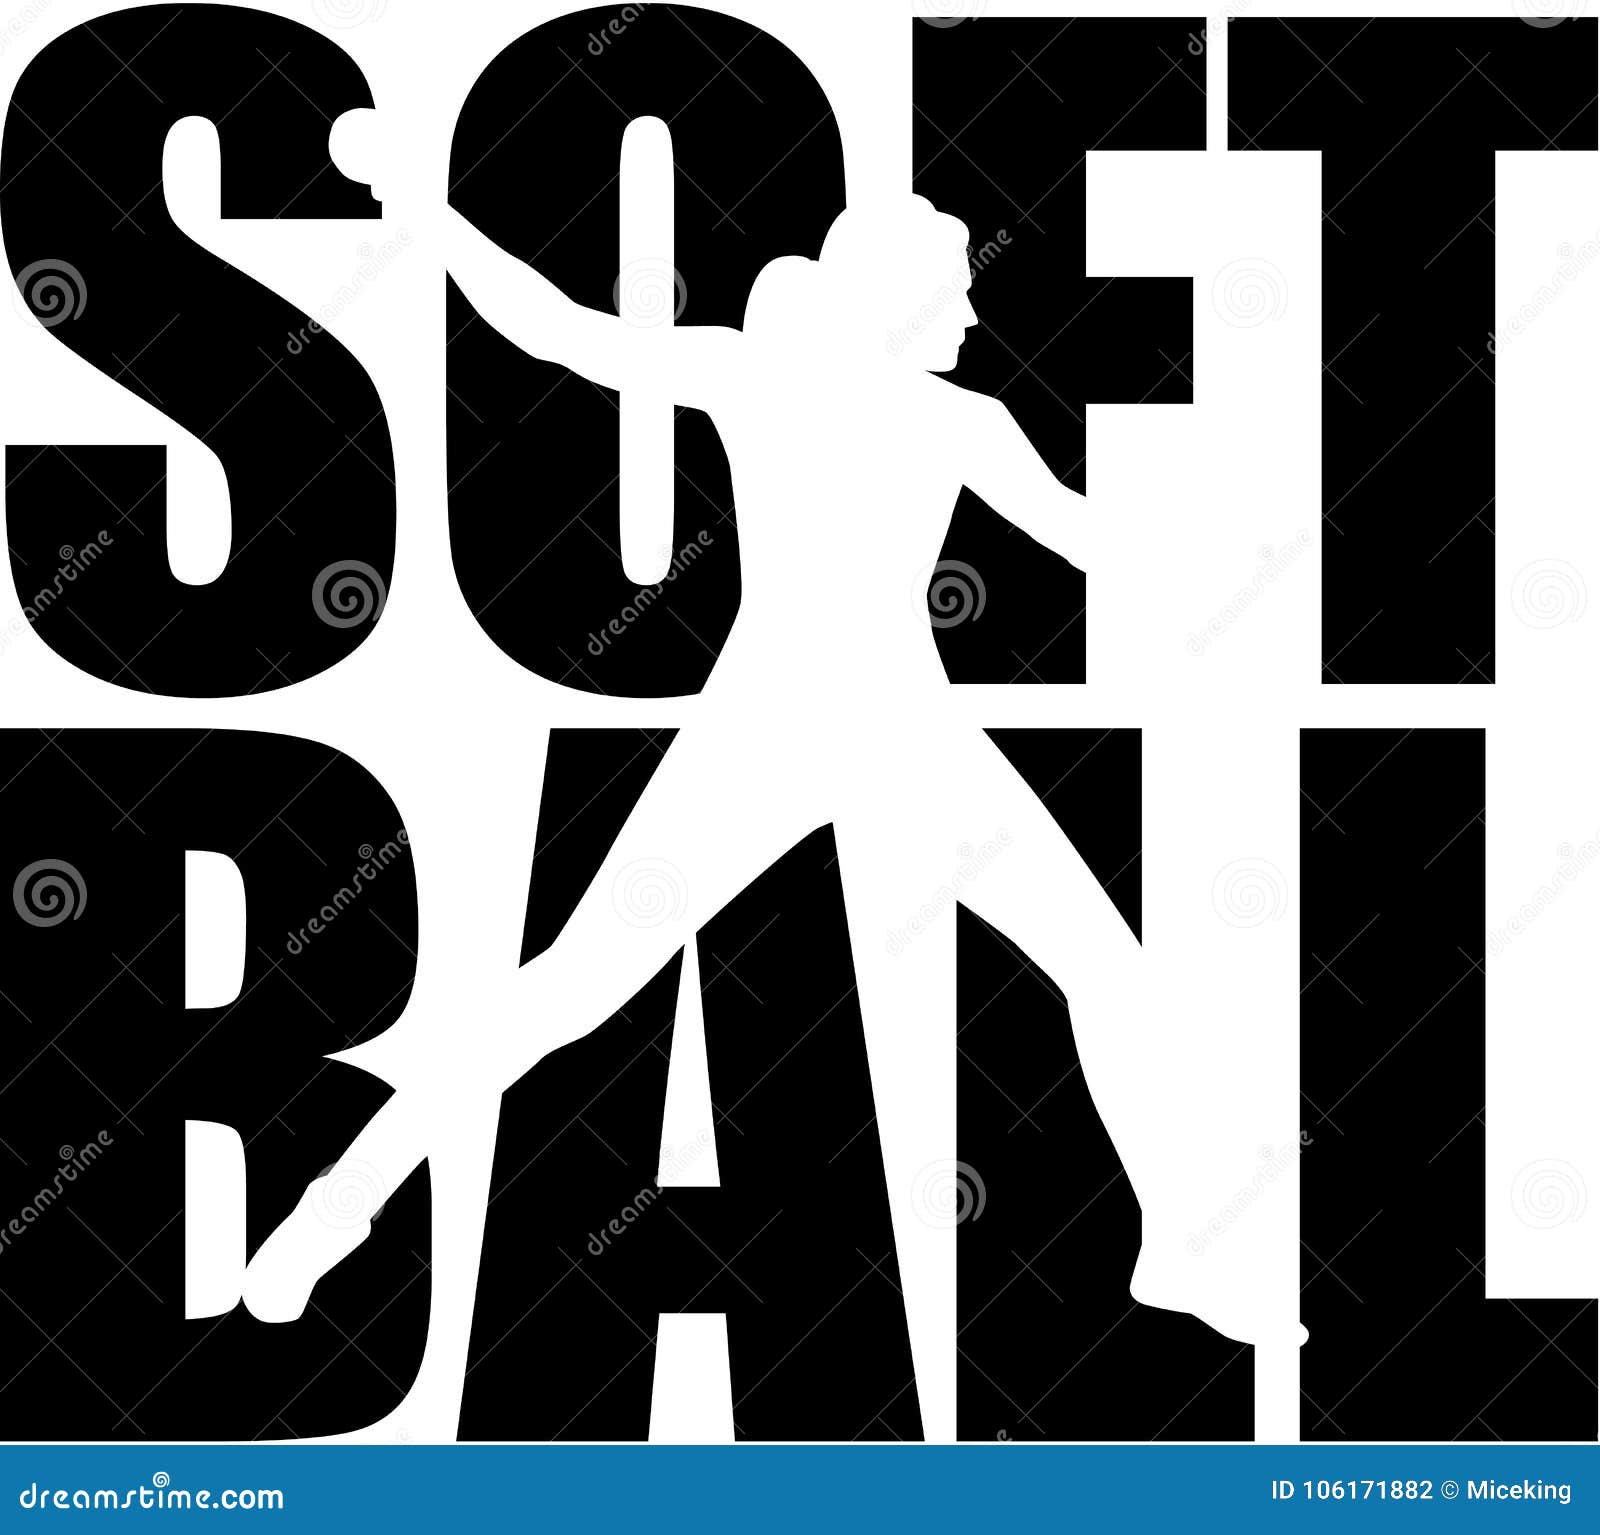 softball word with silhouette cutout